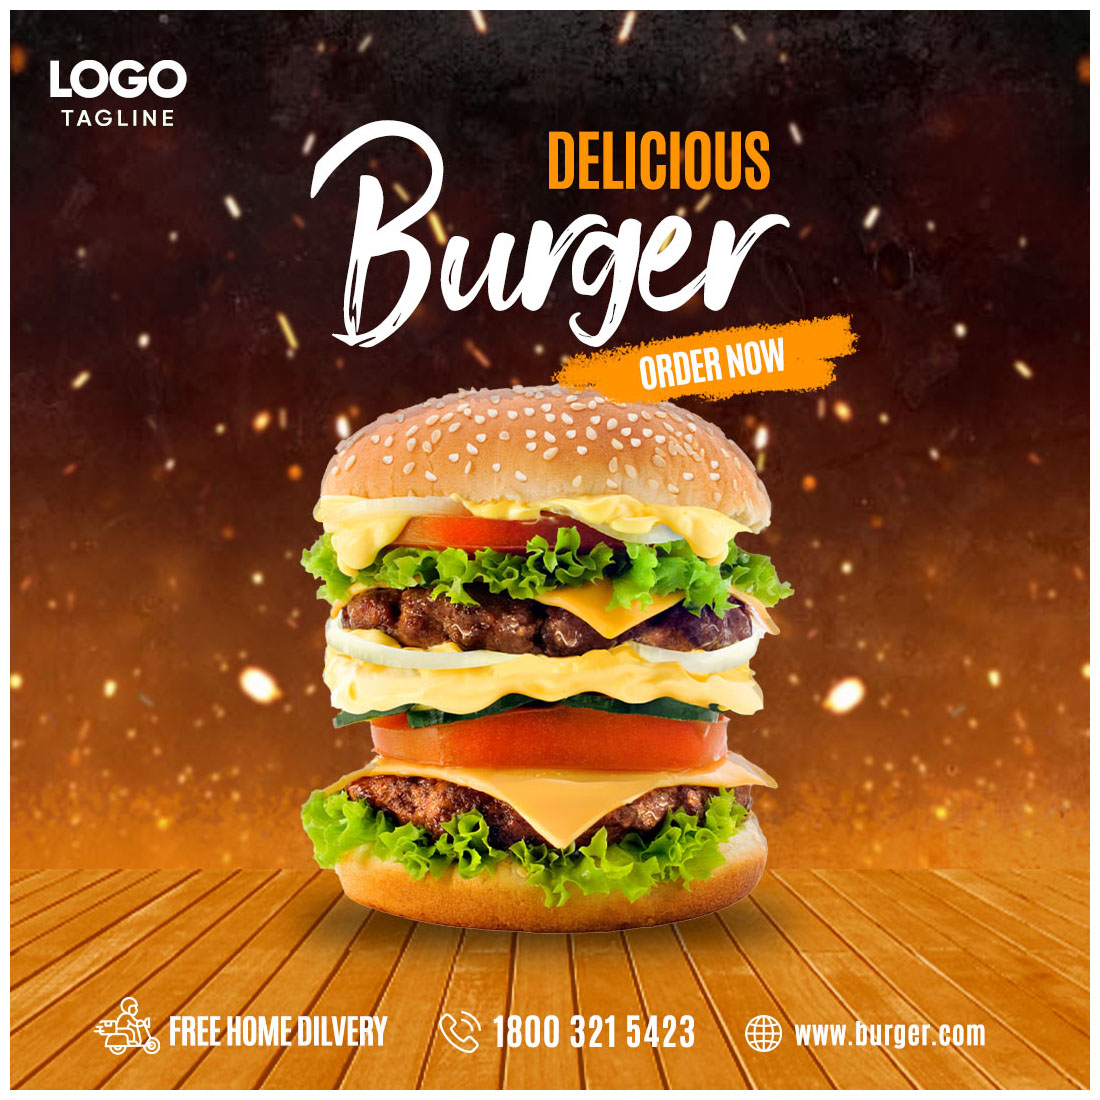 Food Social Media Post Template cover image.